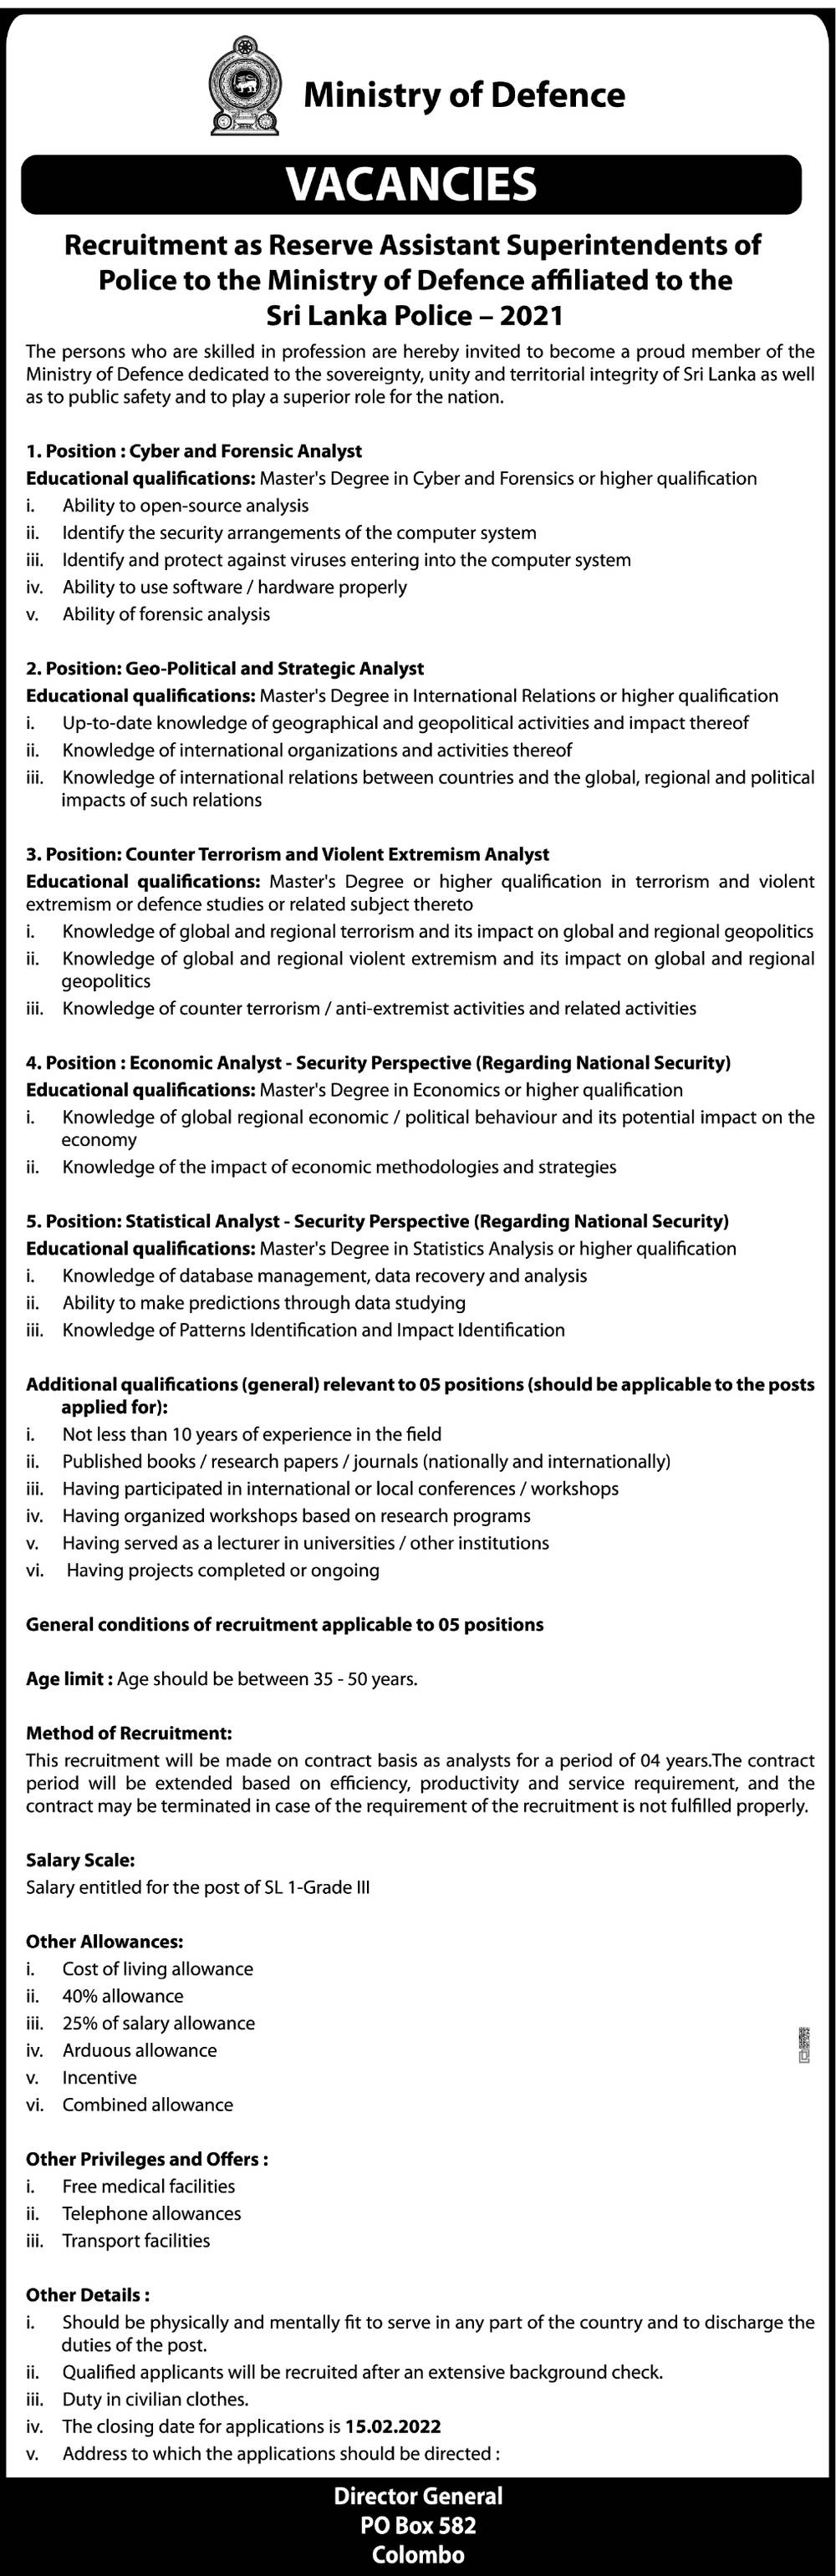 Cyber and Forensic Analyst, Geo Political and Strategic Analyst, Counter Terrorism and Violent Extremism Analyst, Economic Analyst, English Details